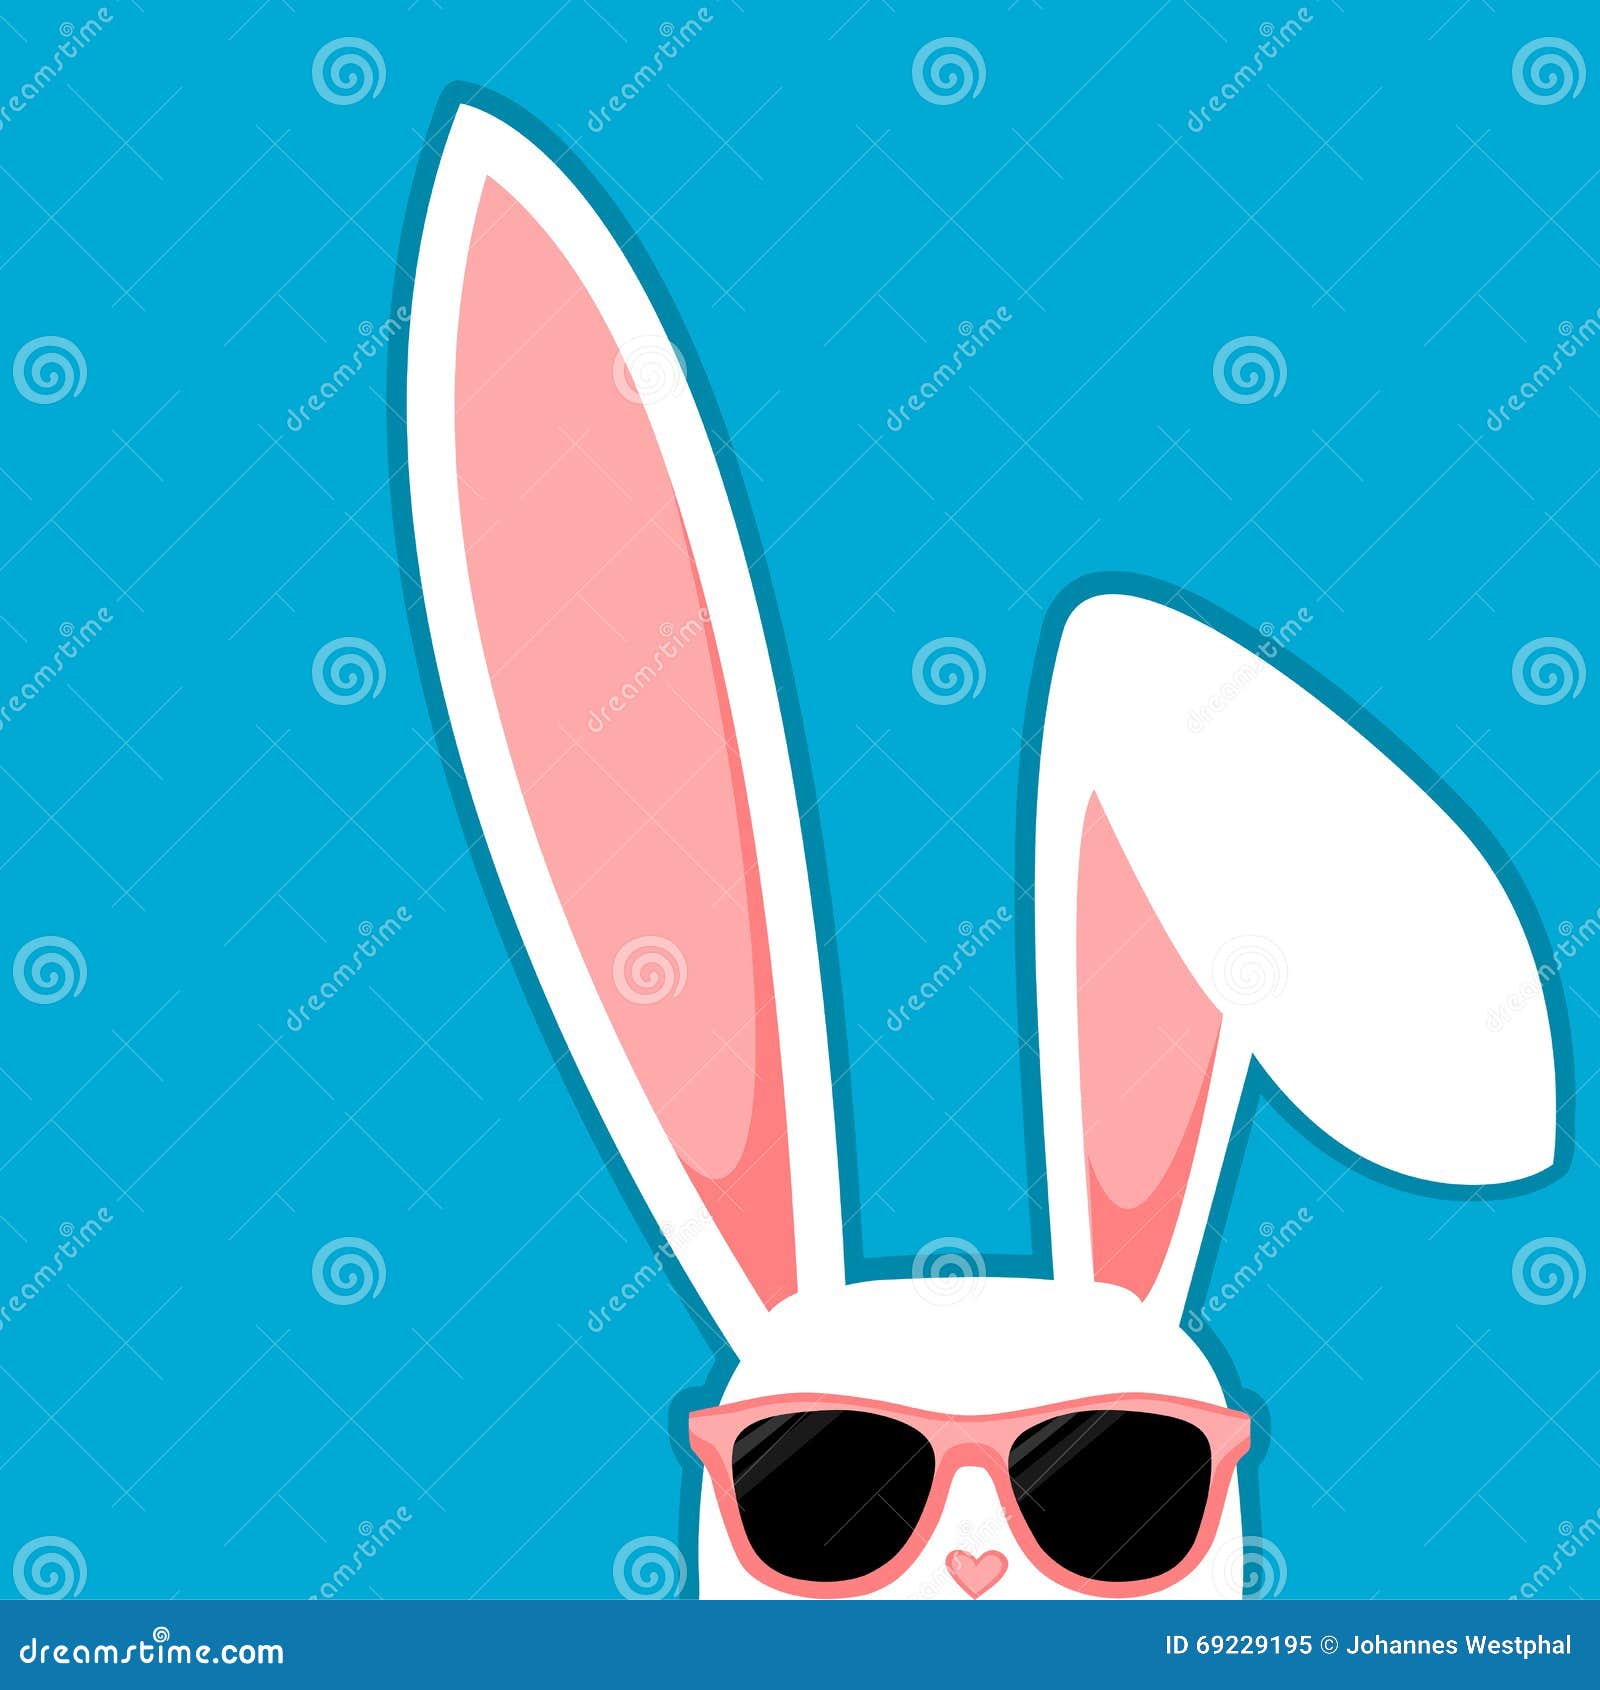 easter bunny white rabbit with big ears and sunglasses on blue background